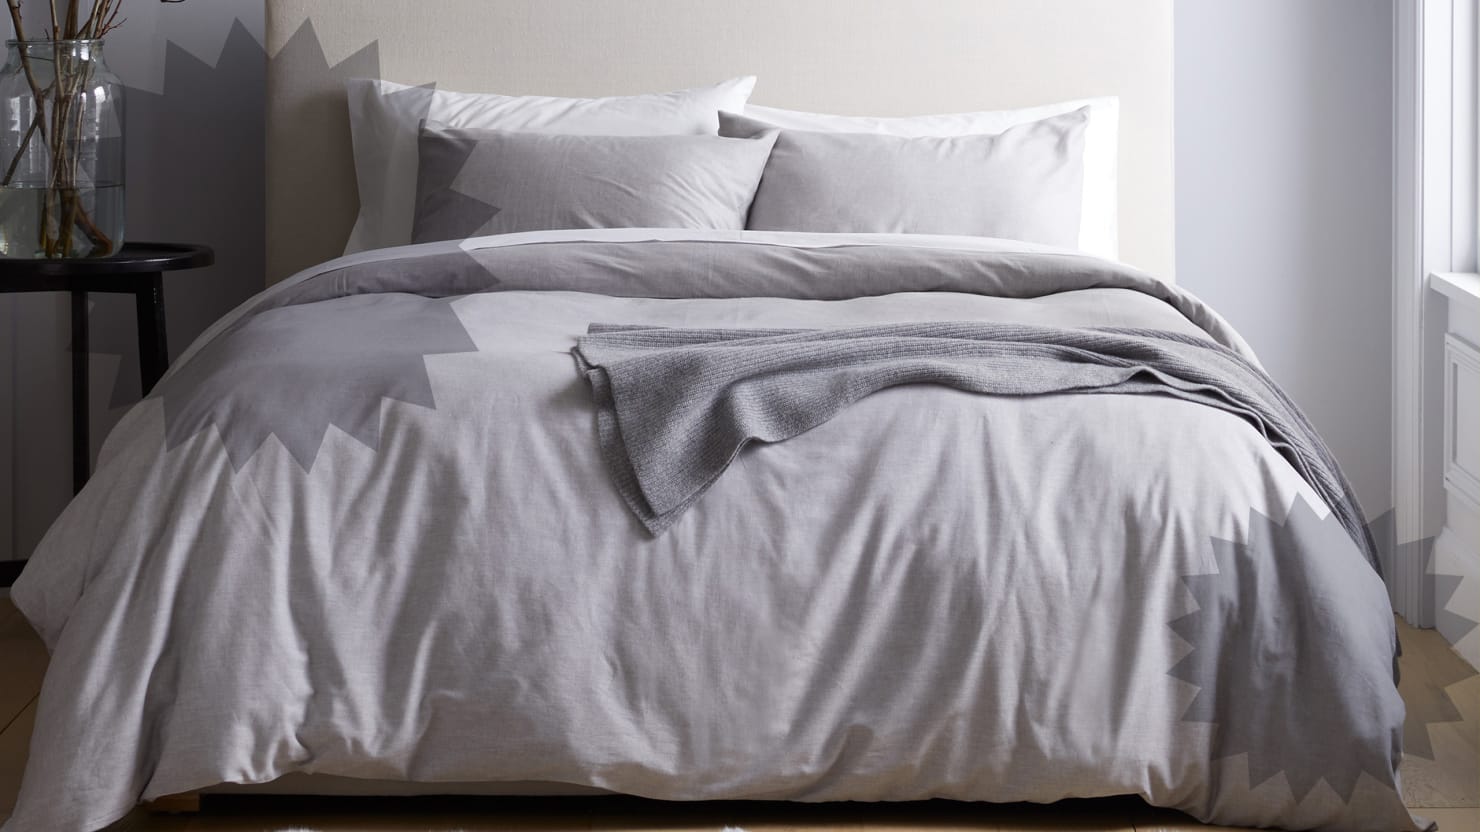 Sweet dreams are in your future with Quince’s cashmere bedding.